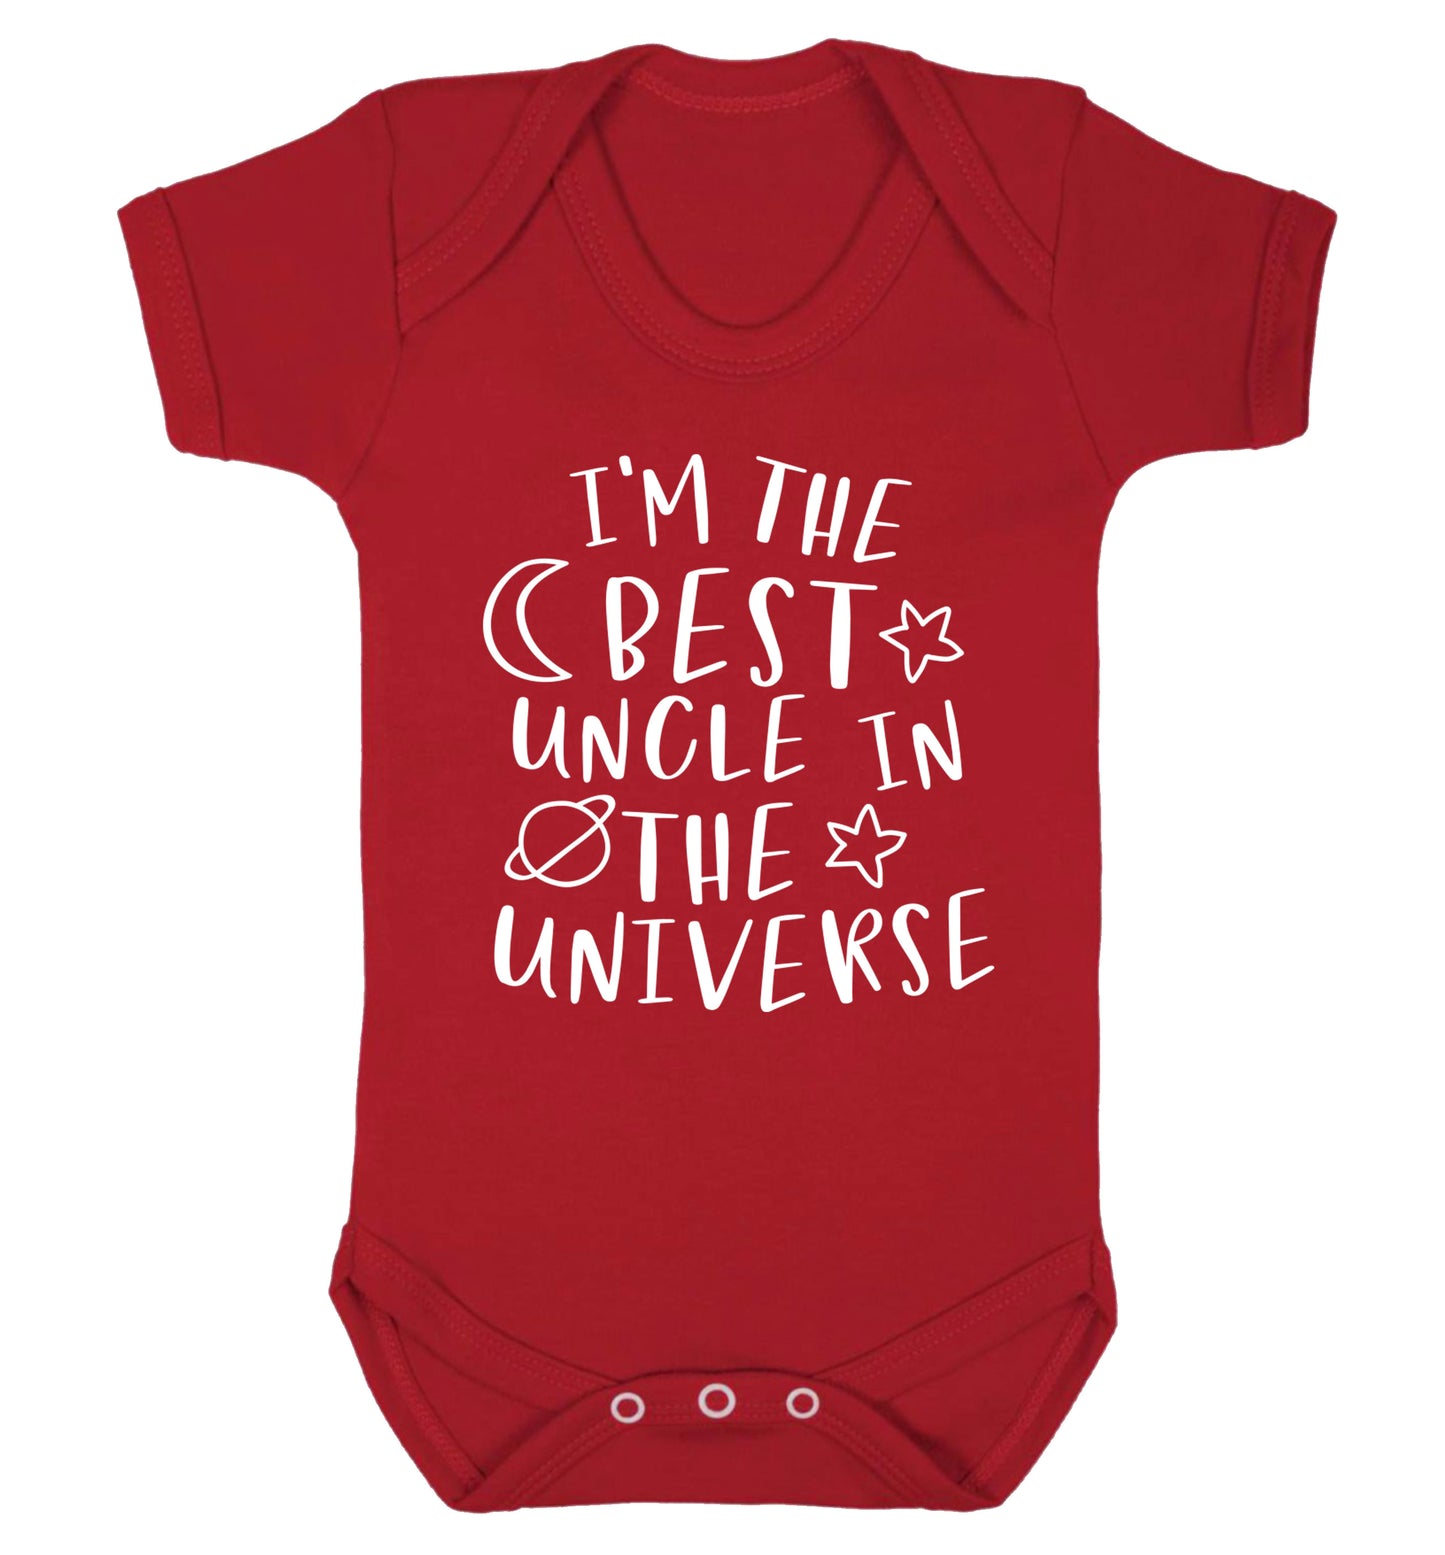 I'm the best uncle in the universe Baby Vest red 18-24 months